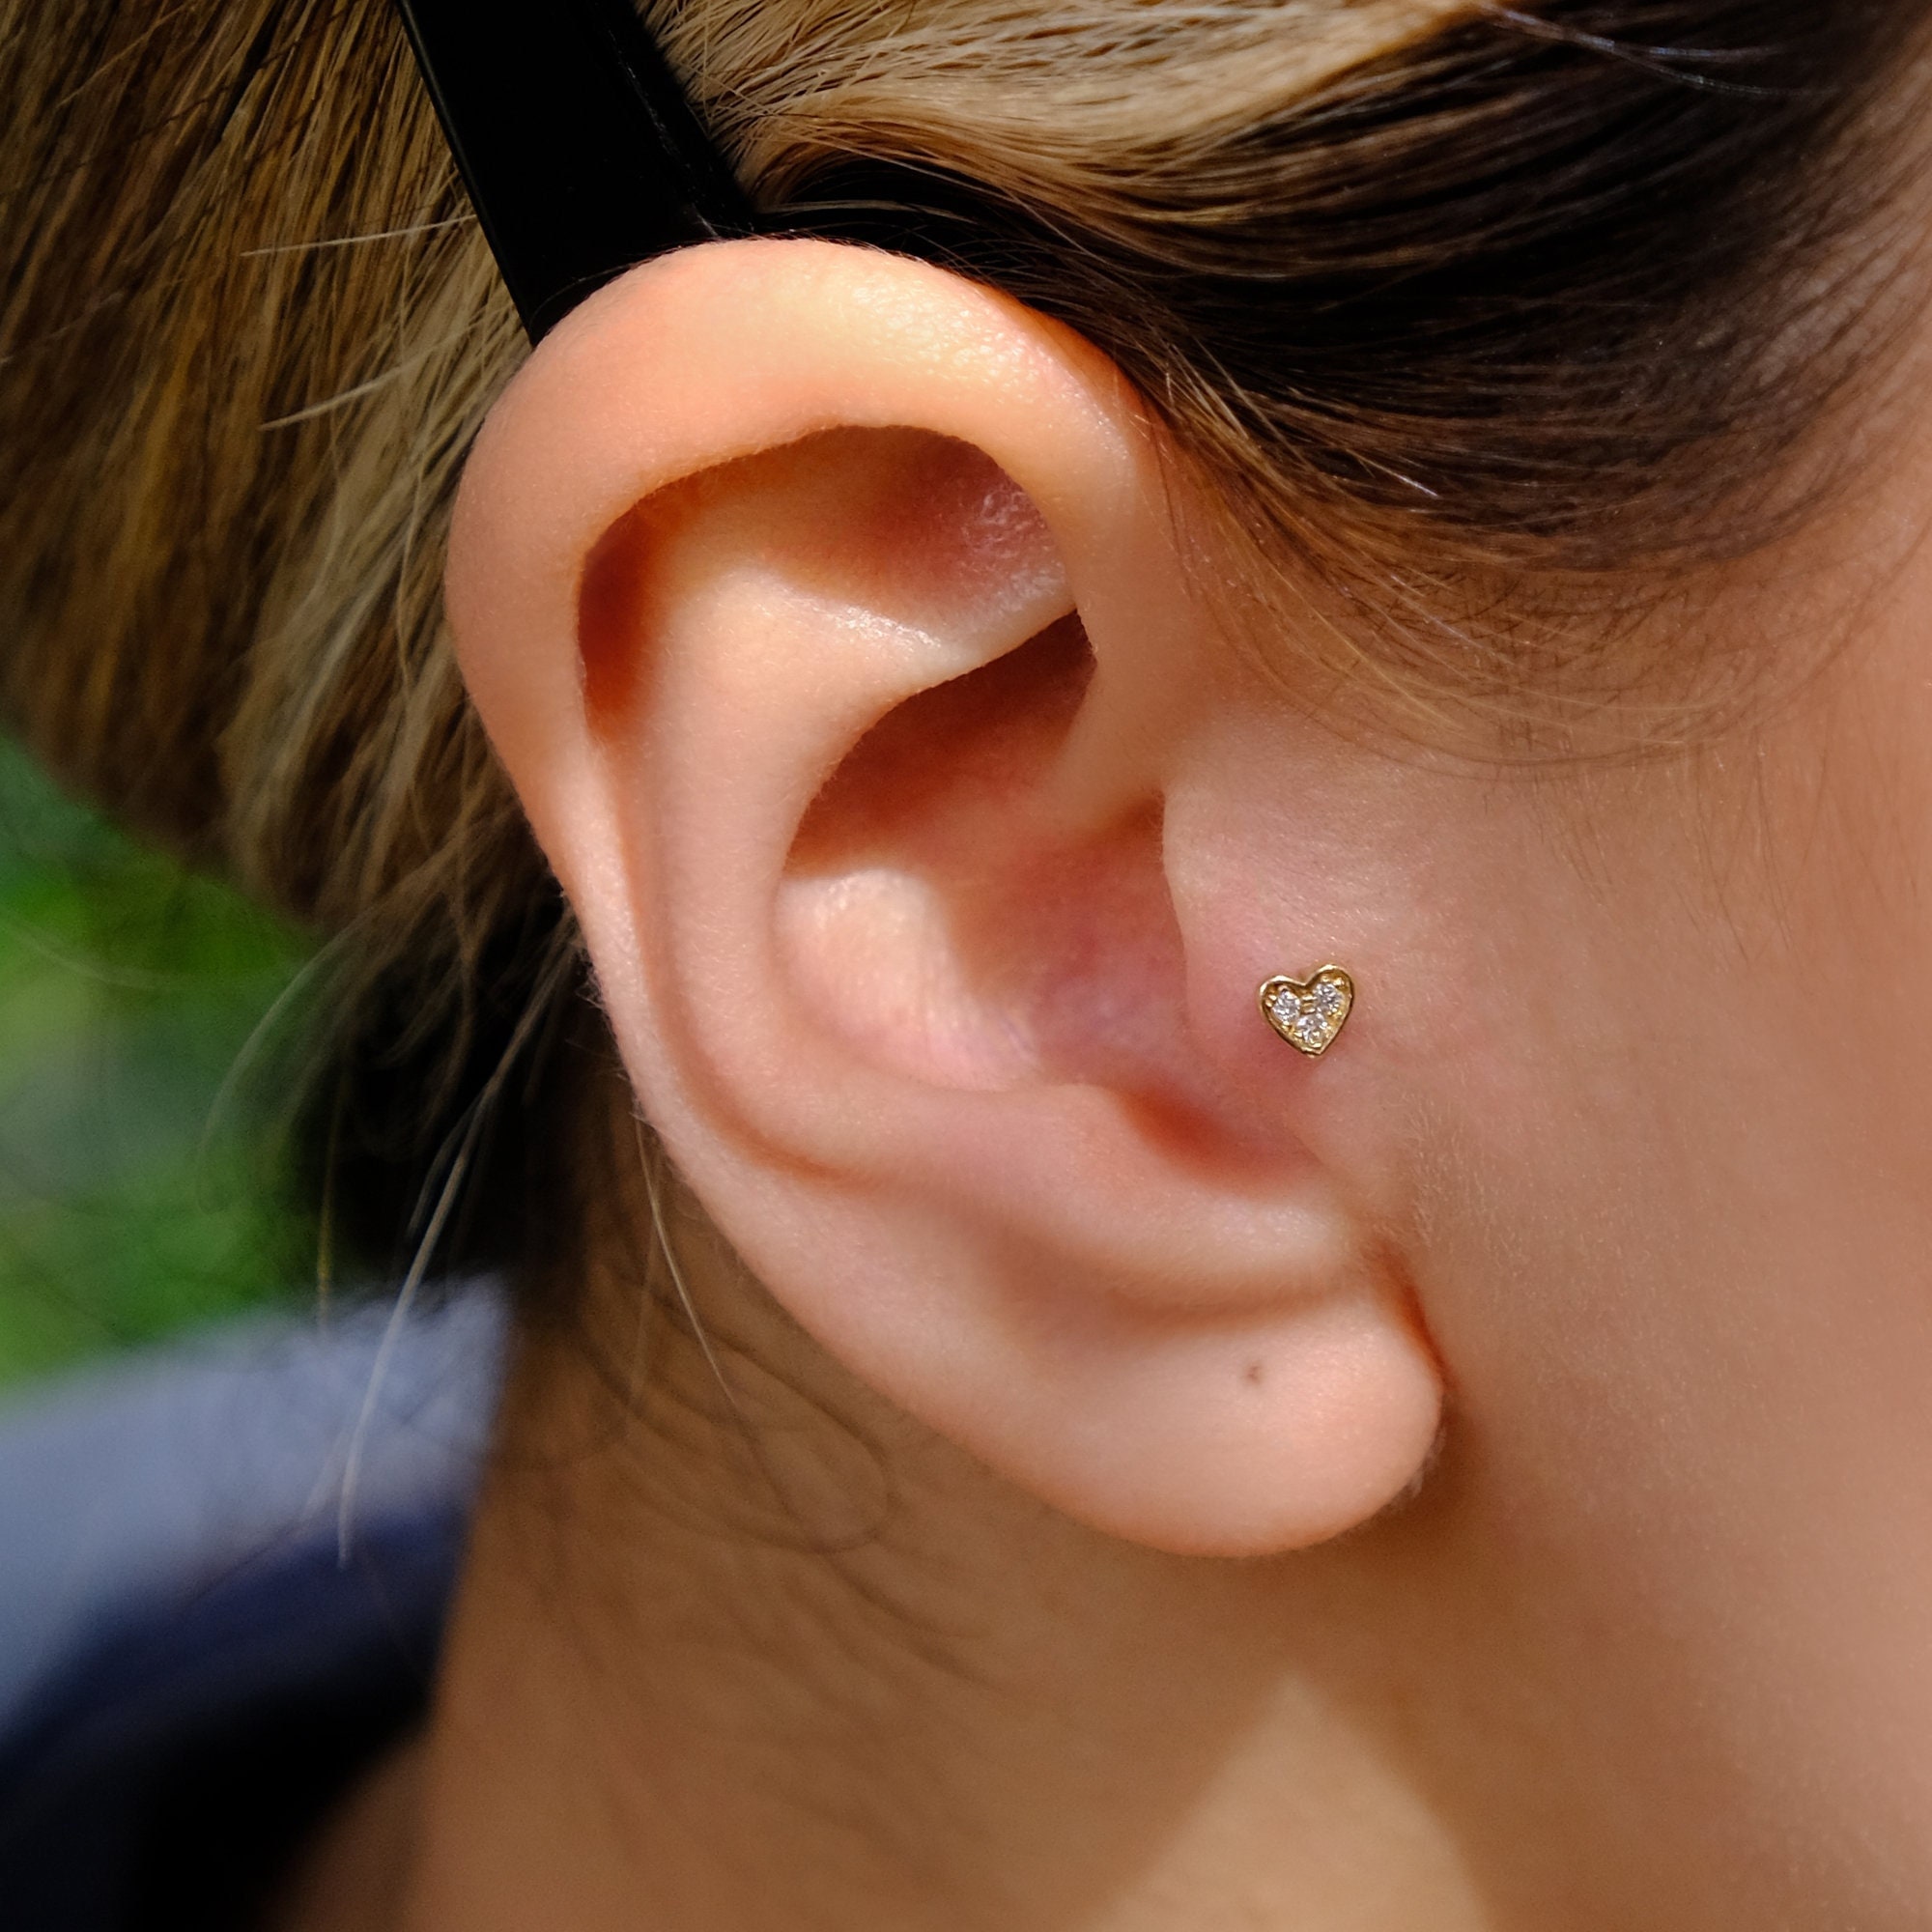 Delicate Real Solitaire Tragus Stud Piercing Gold Helix Stud -  Israel